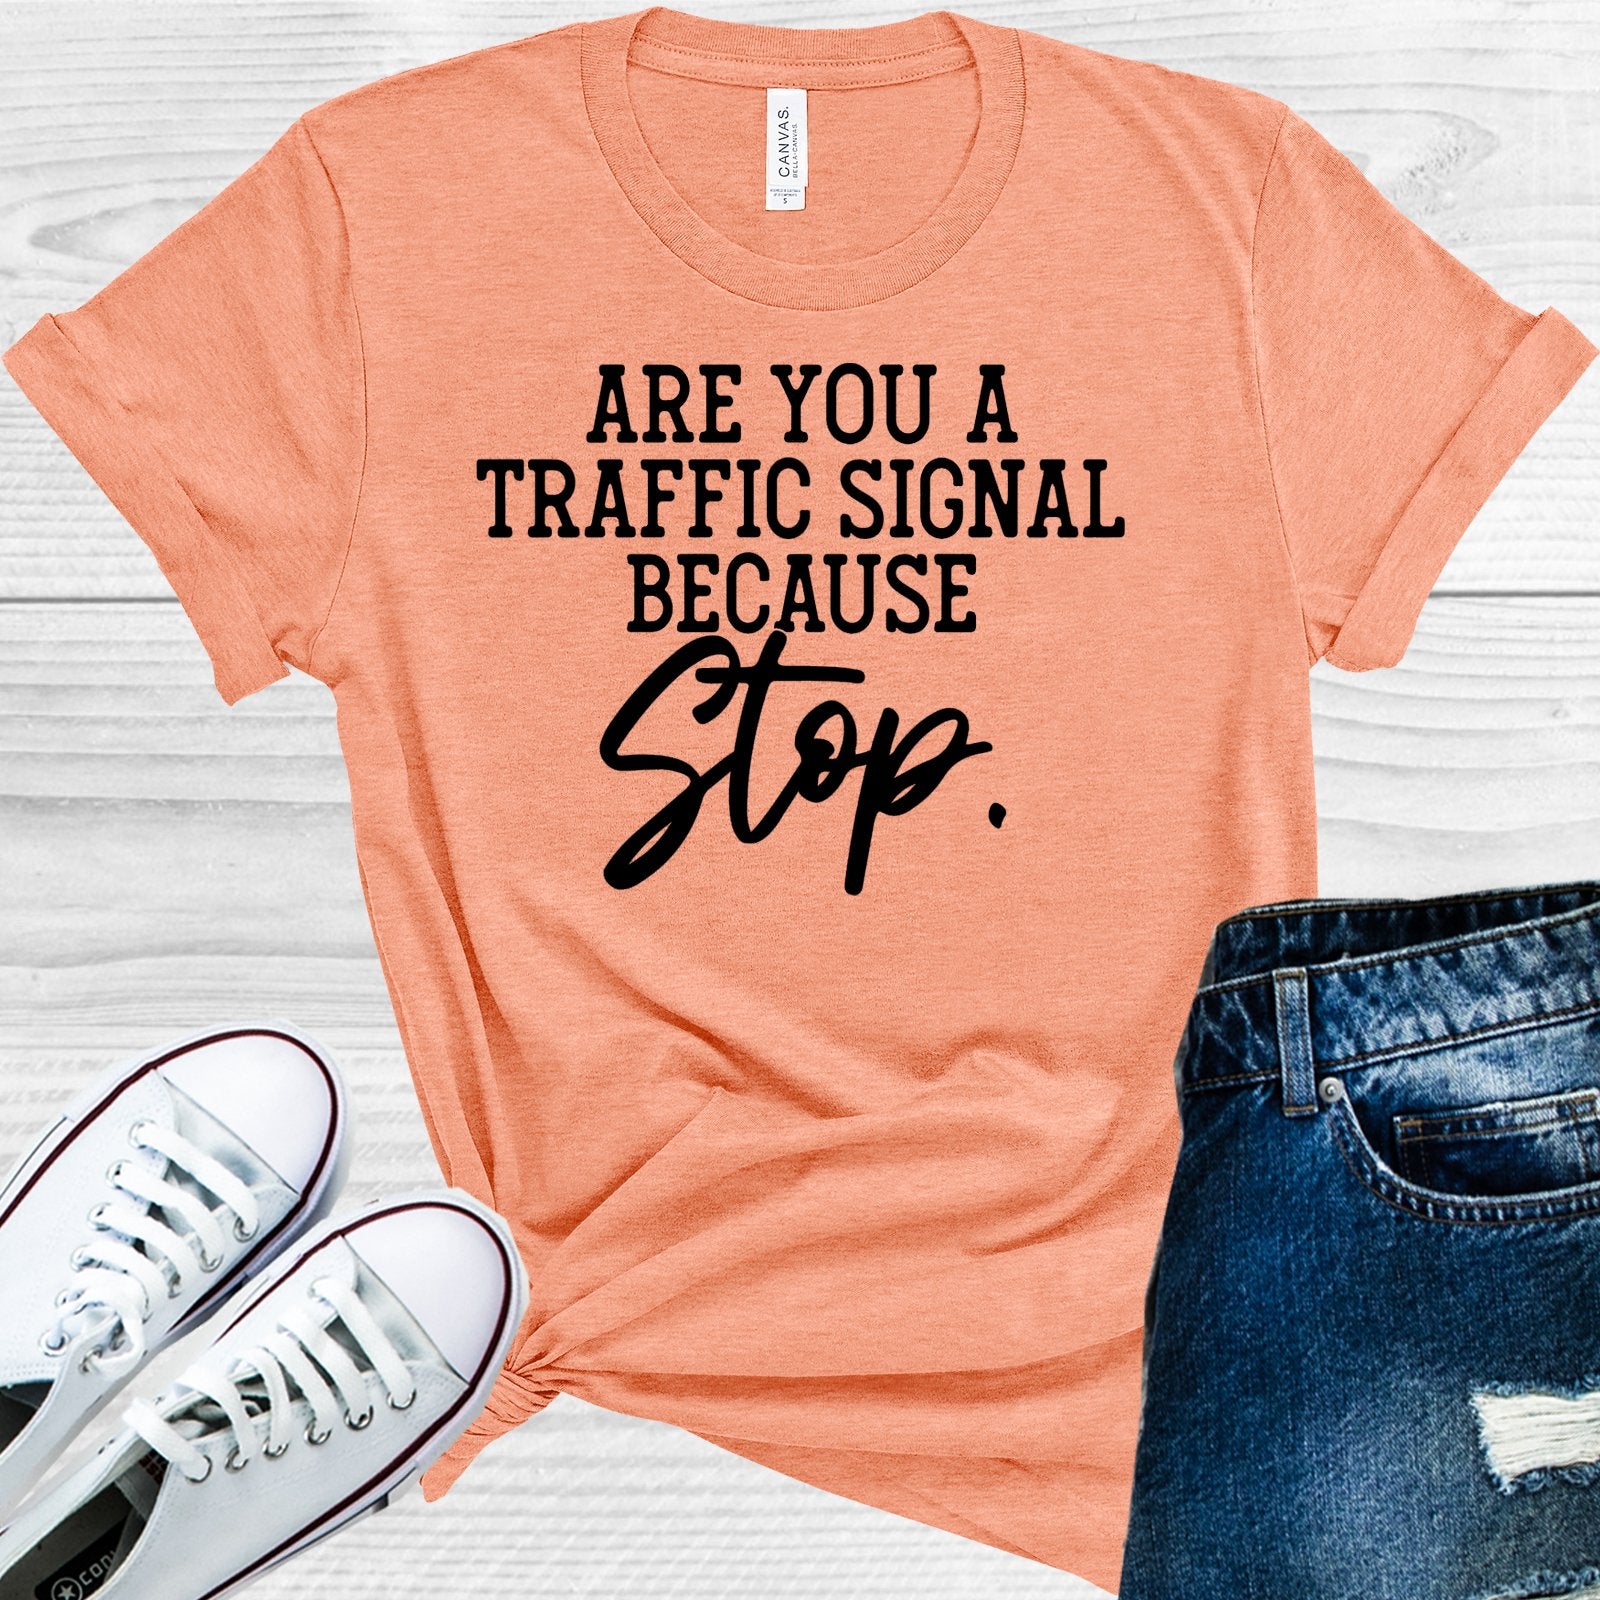 Are You A Traffic Signal Because Stop Graphic Tee Graphic Tee